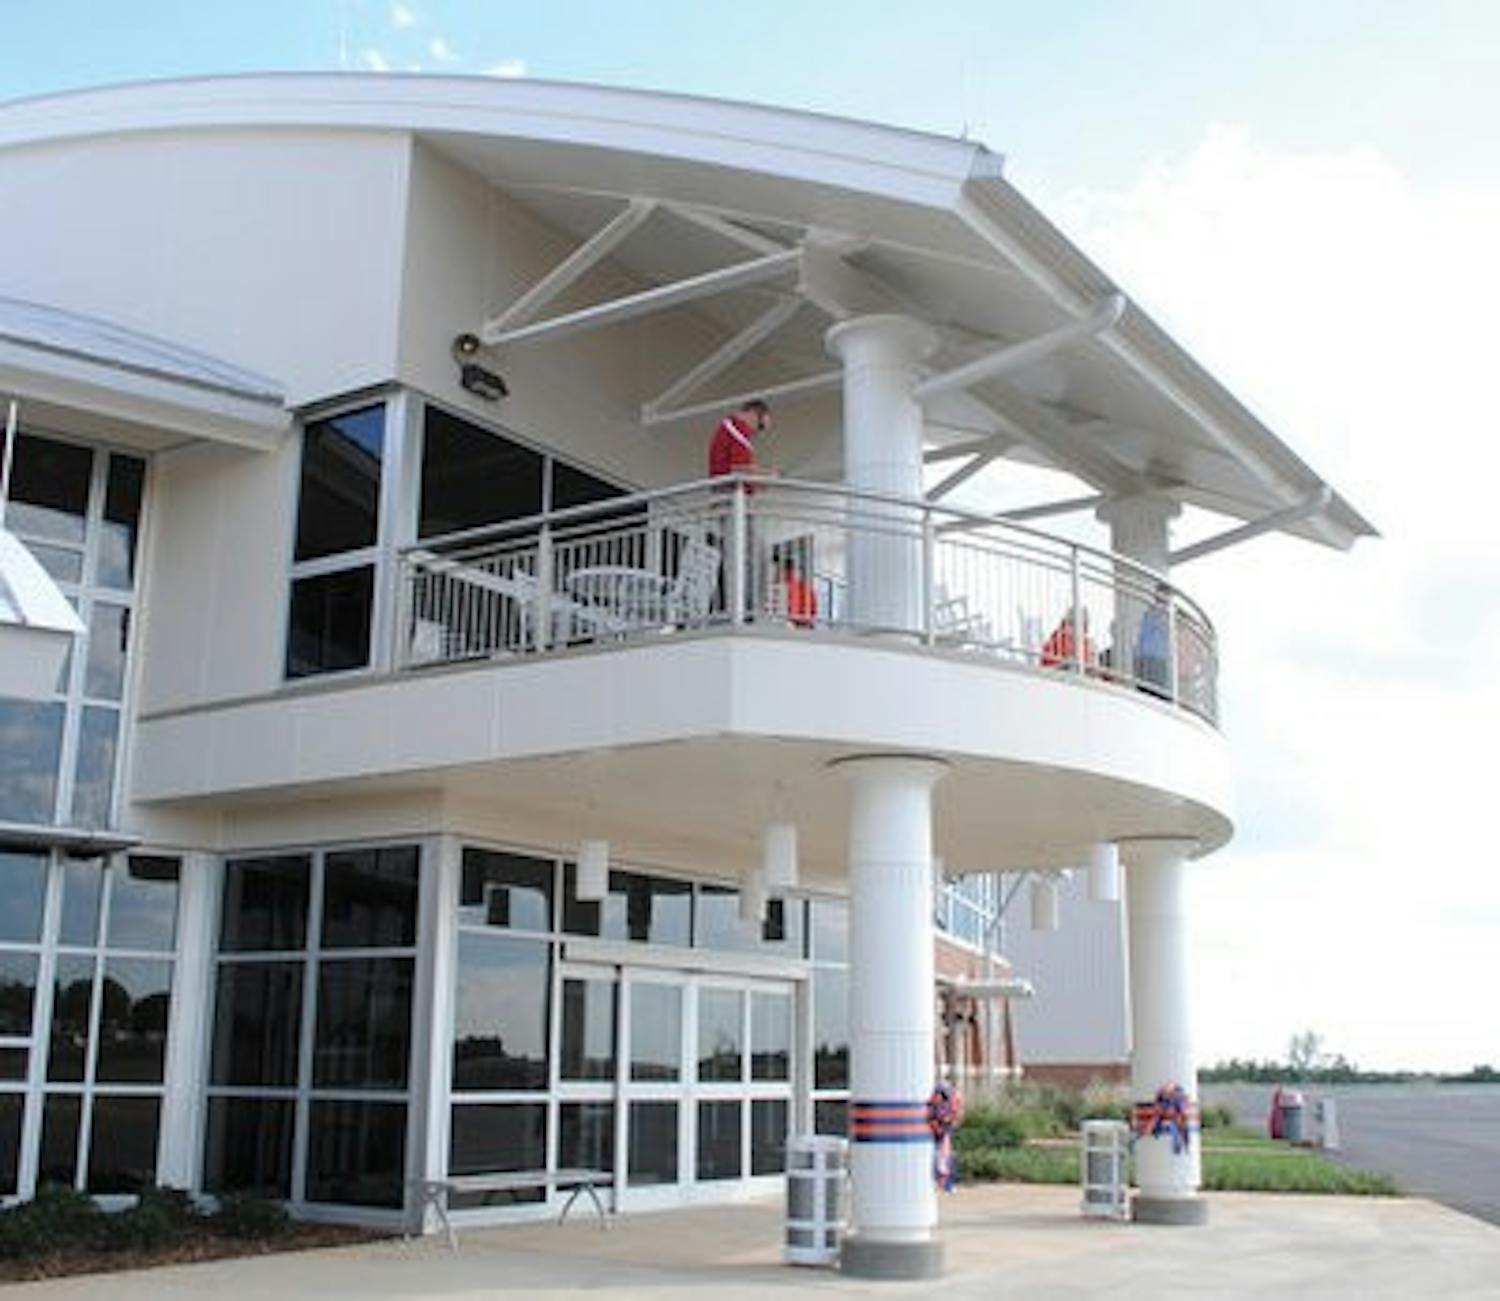 The Auburn University Regional Airport celebrated the opening of a new terminal Friday afternoon. )Maria Iampietro / ASSOCIATE PHOTO EDITOR)